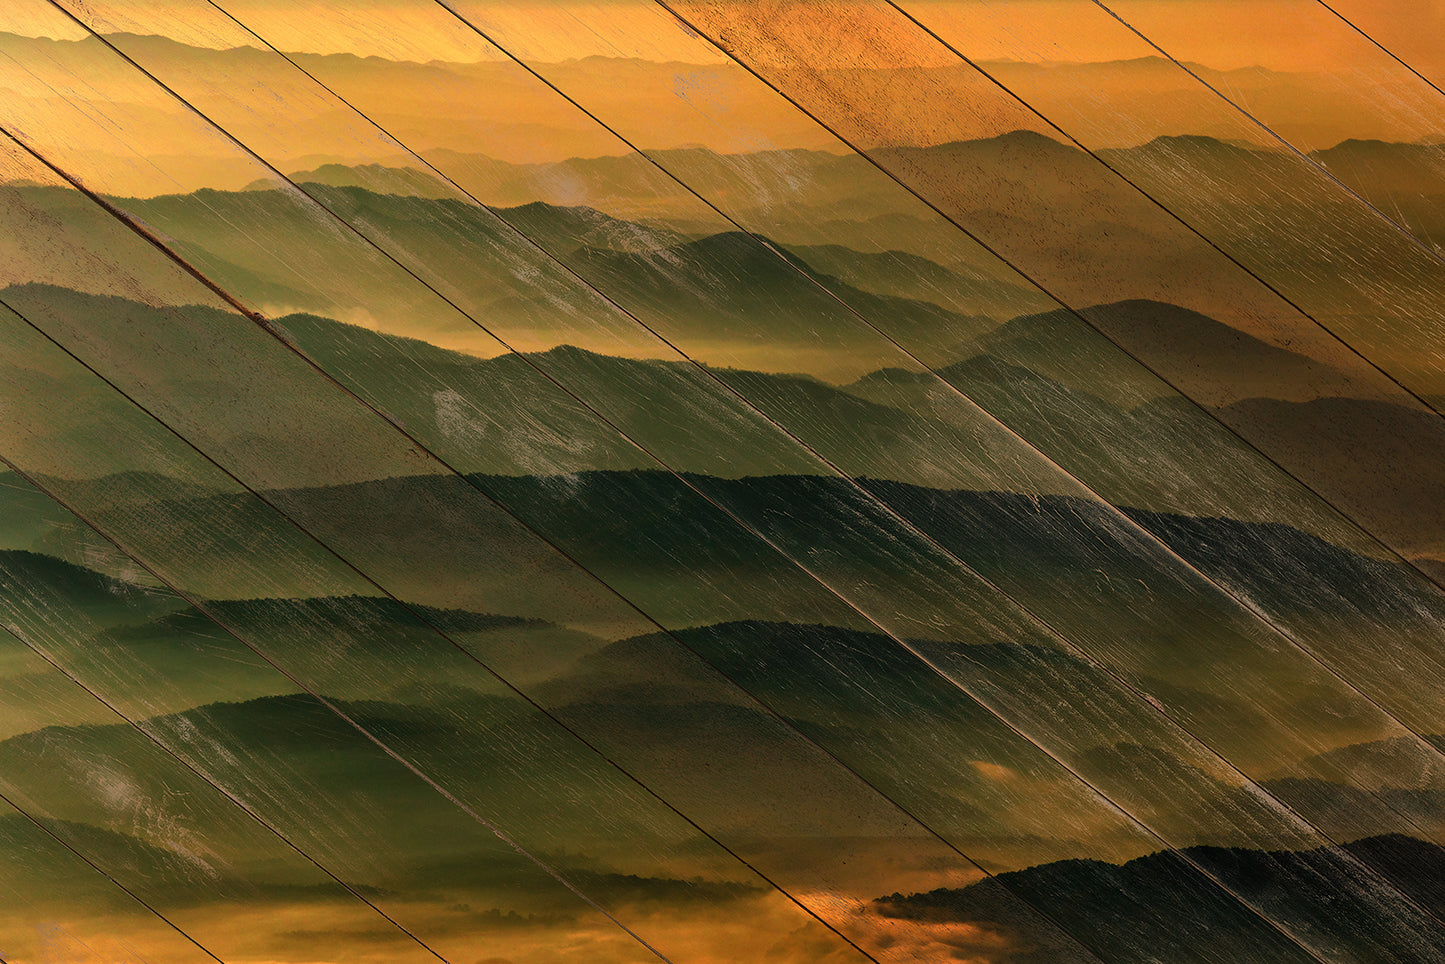 Faux Wood Foggy Mountain Layers at Sunset Landscape Fine Art Canvas Wall Art Prints  - PIPAFINEART